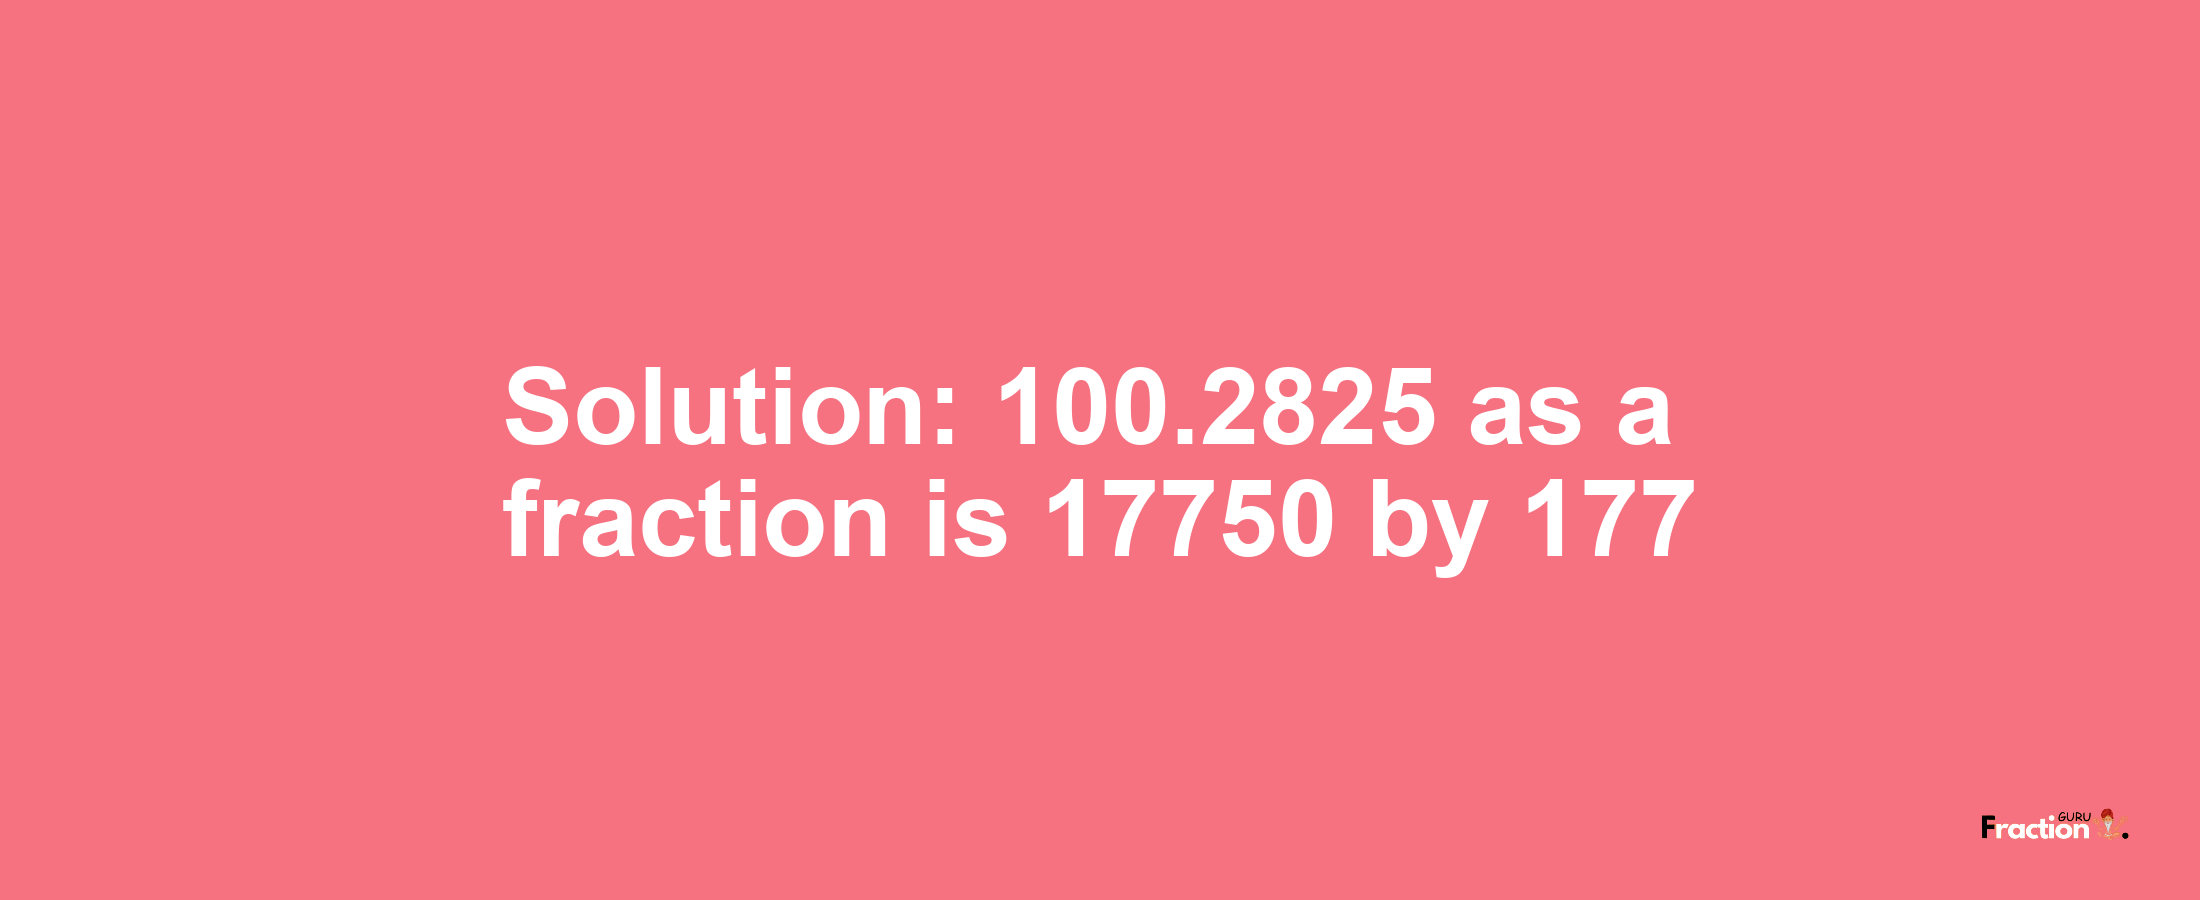 Solution:100.2825 as a fraction is 17750/177